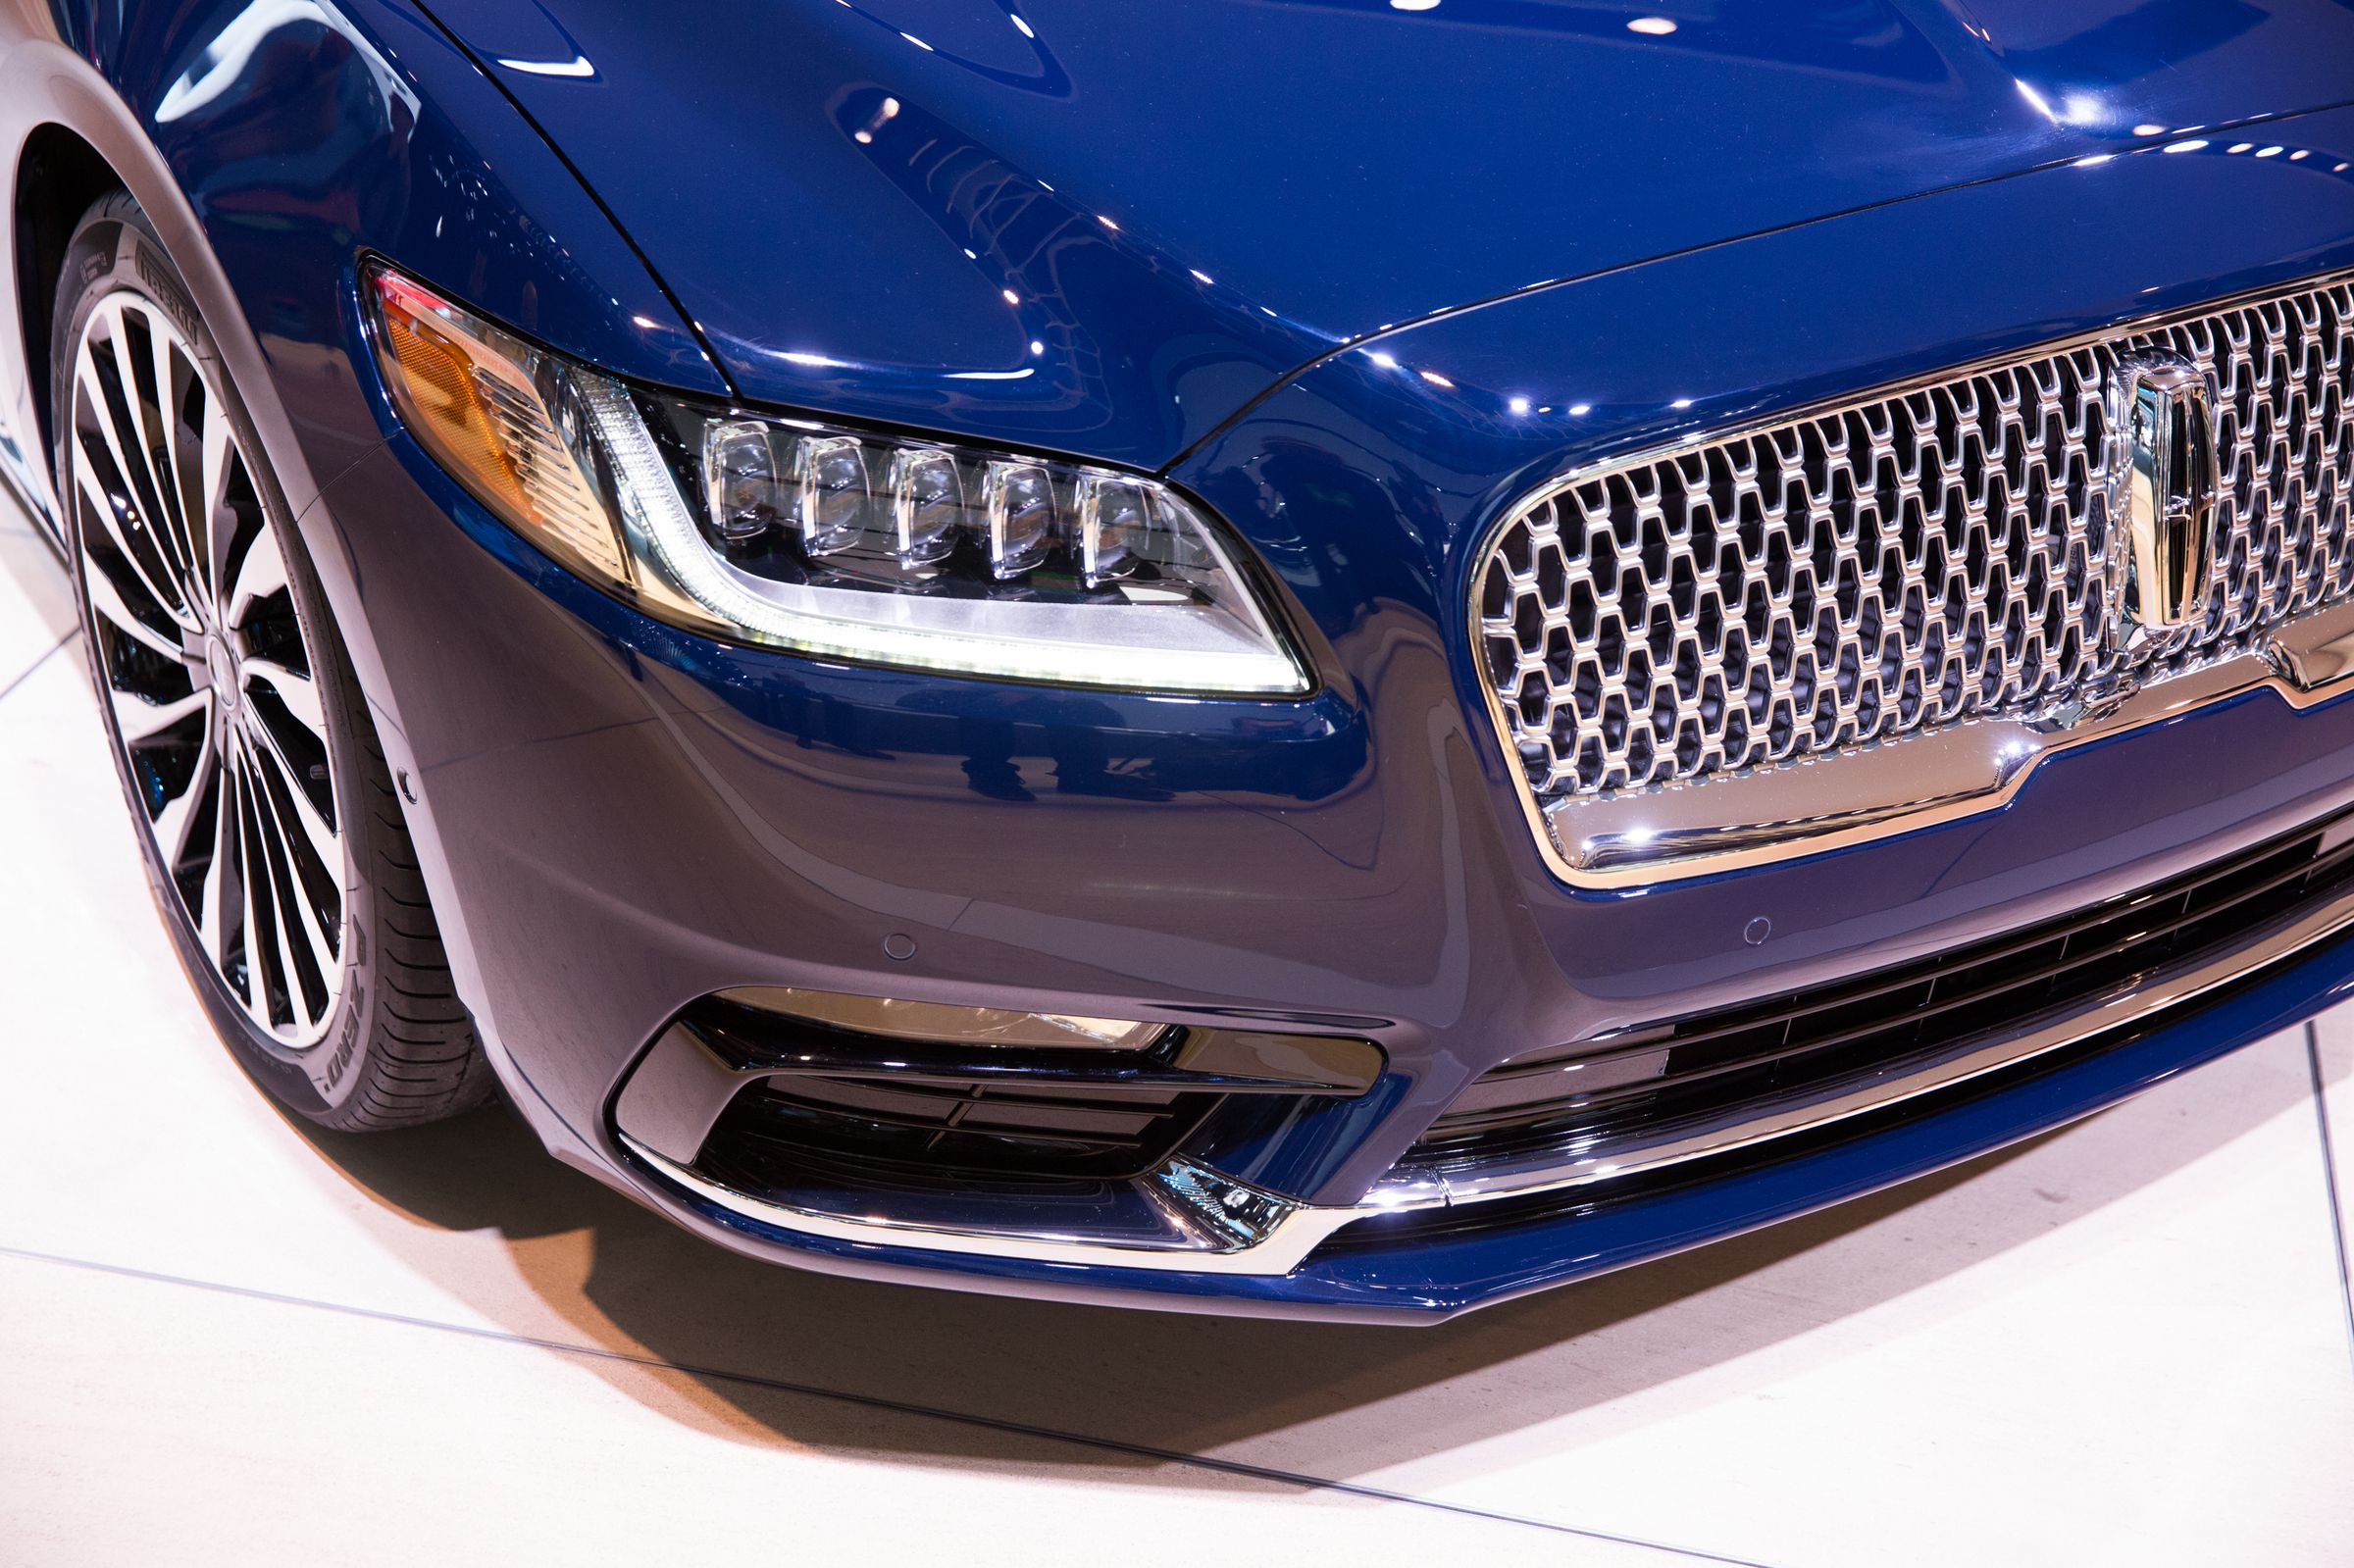 Lincoln Continental at the Detroit Auto Show